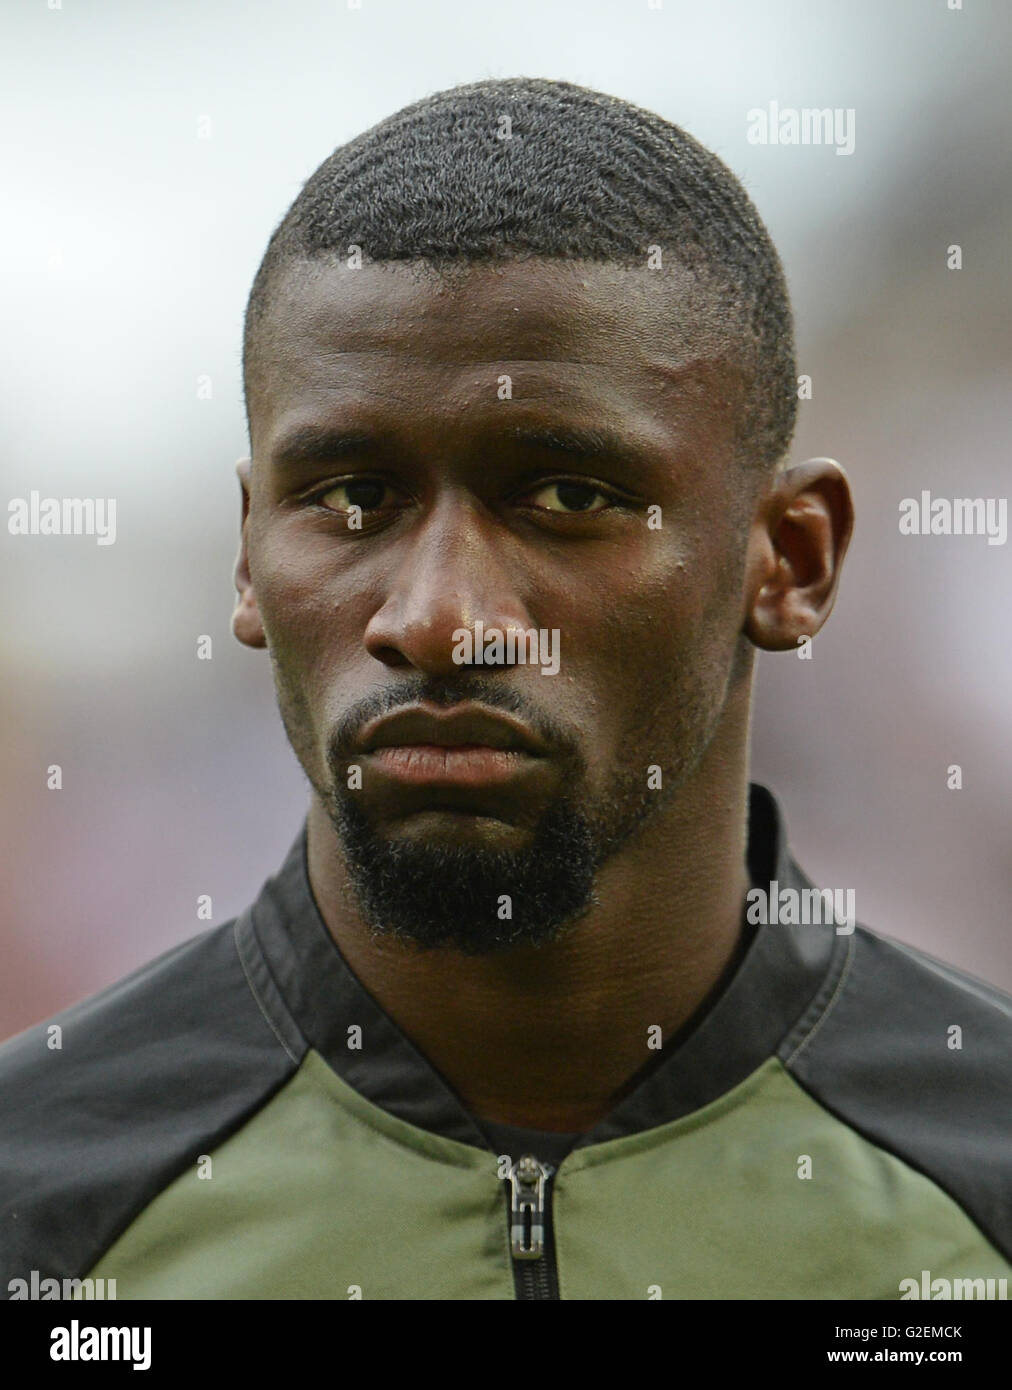 Augsburg, Germany. 29th May, 2016. Germany's Antonio Ruediger stands during the national anthem ahead of the international soccer match between German and Slovakia in the WWK Arena in Augsburg, Germany, 29 May 2016. Photo: ANDREAS GEBERT/dpa/Alamy Live News Stock Photo